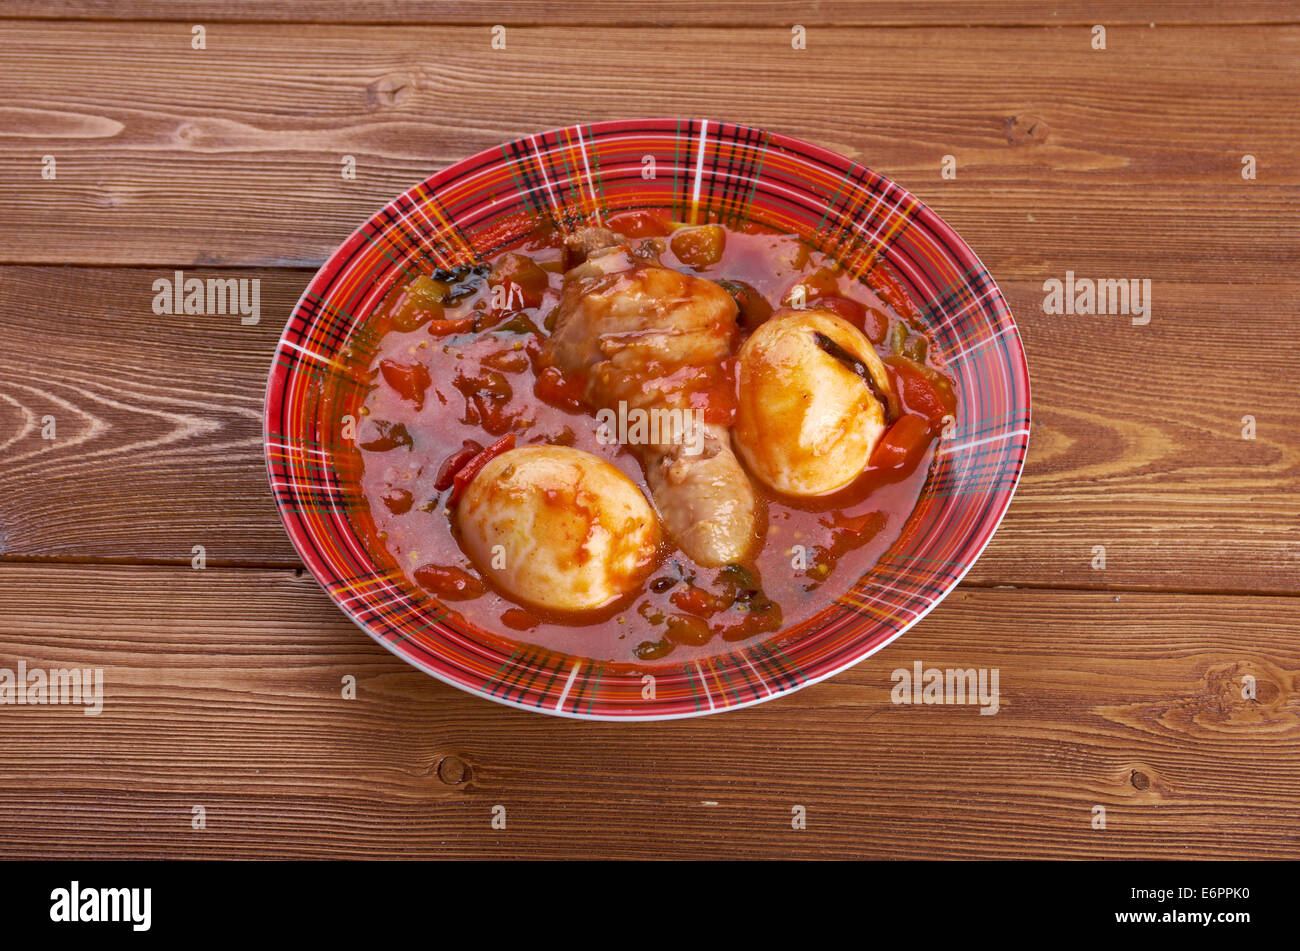 Doro Wat - Ethiopian red chicken stew wat is one such stew, made from chicken and sometimes hard-boiled eggs. Stock Photo